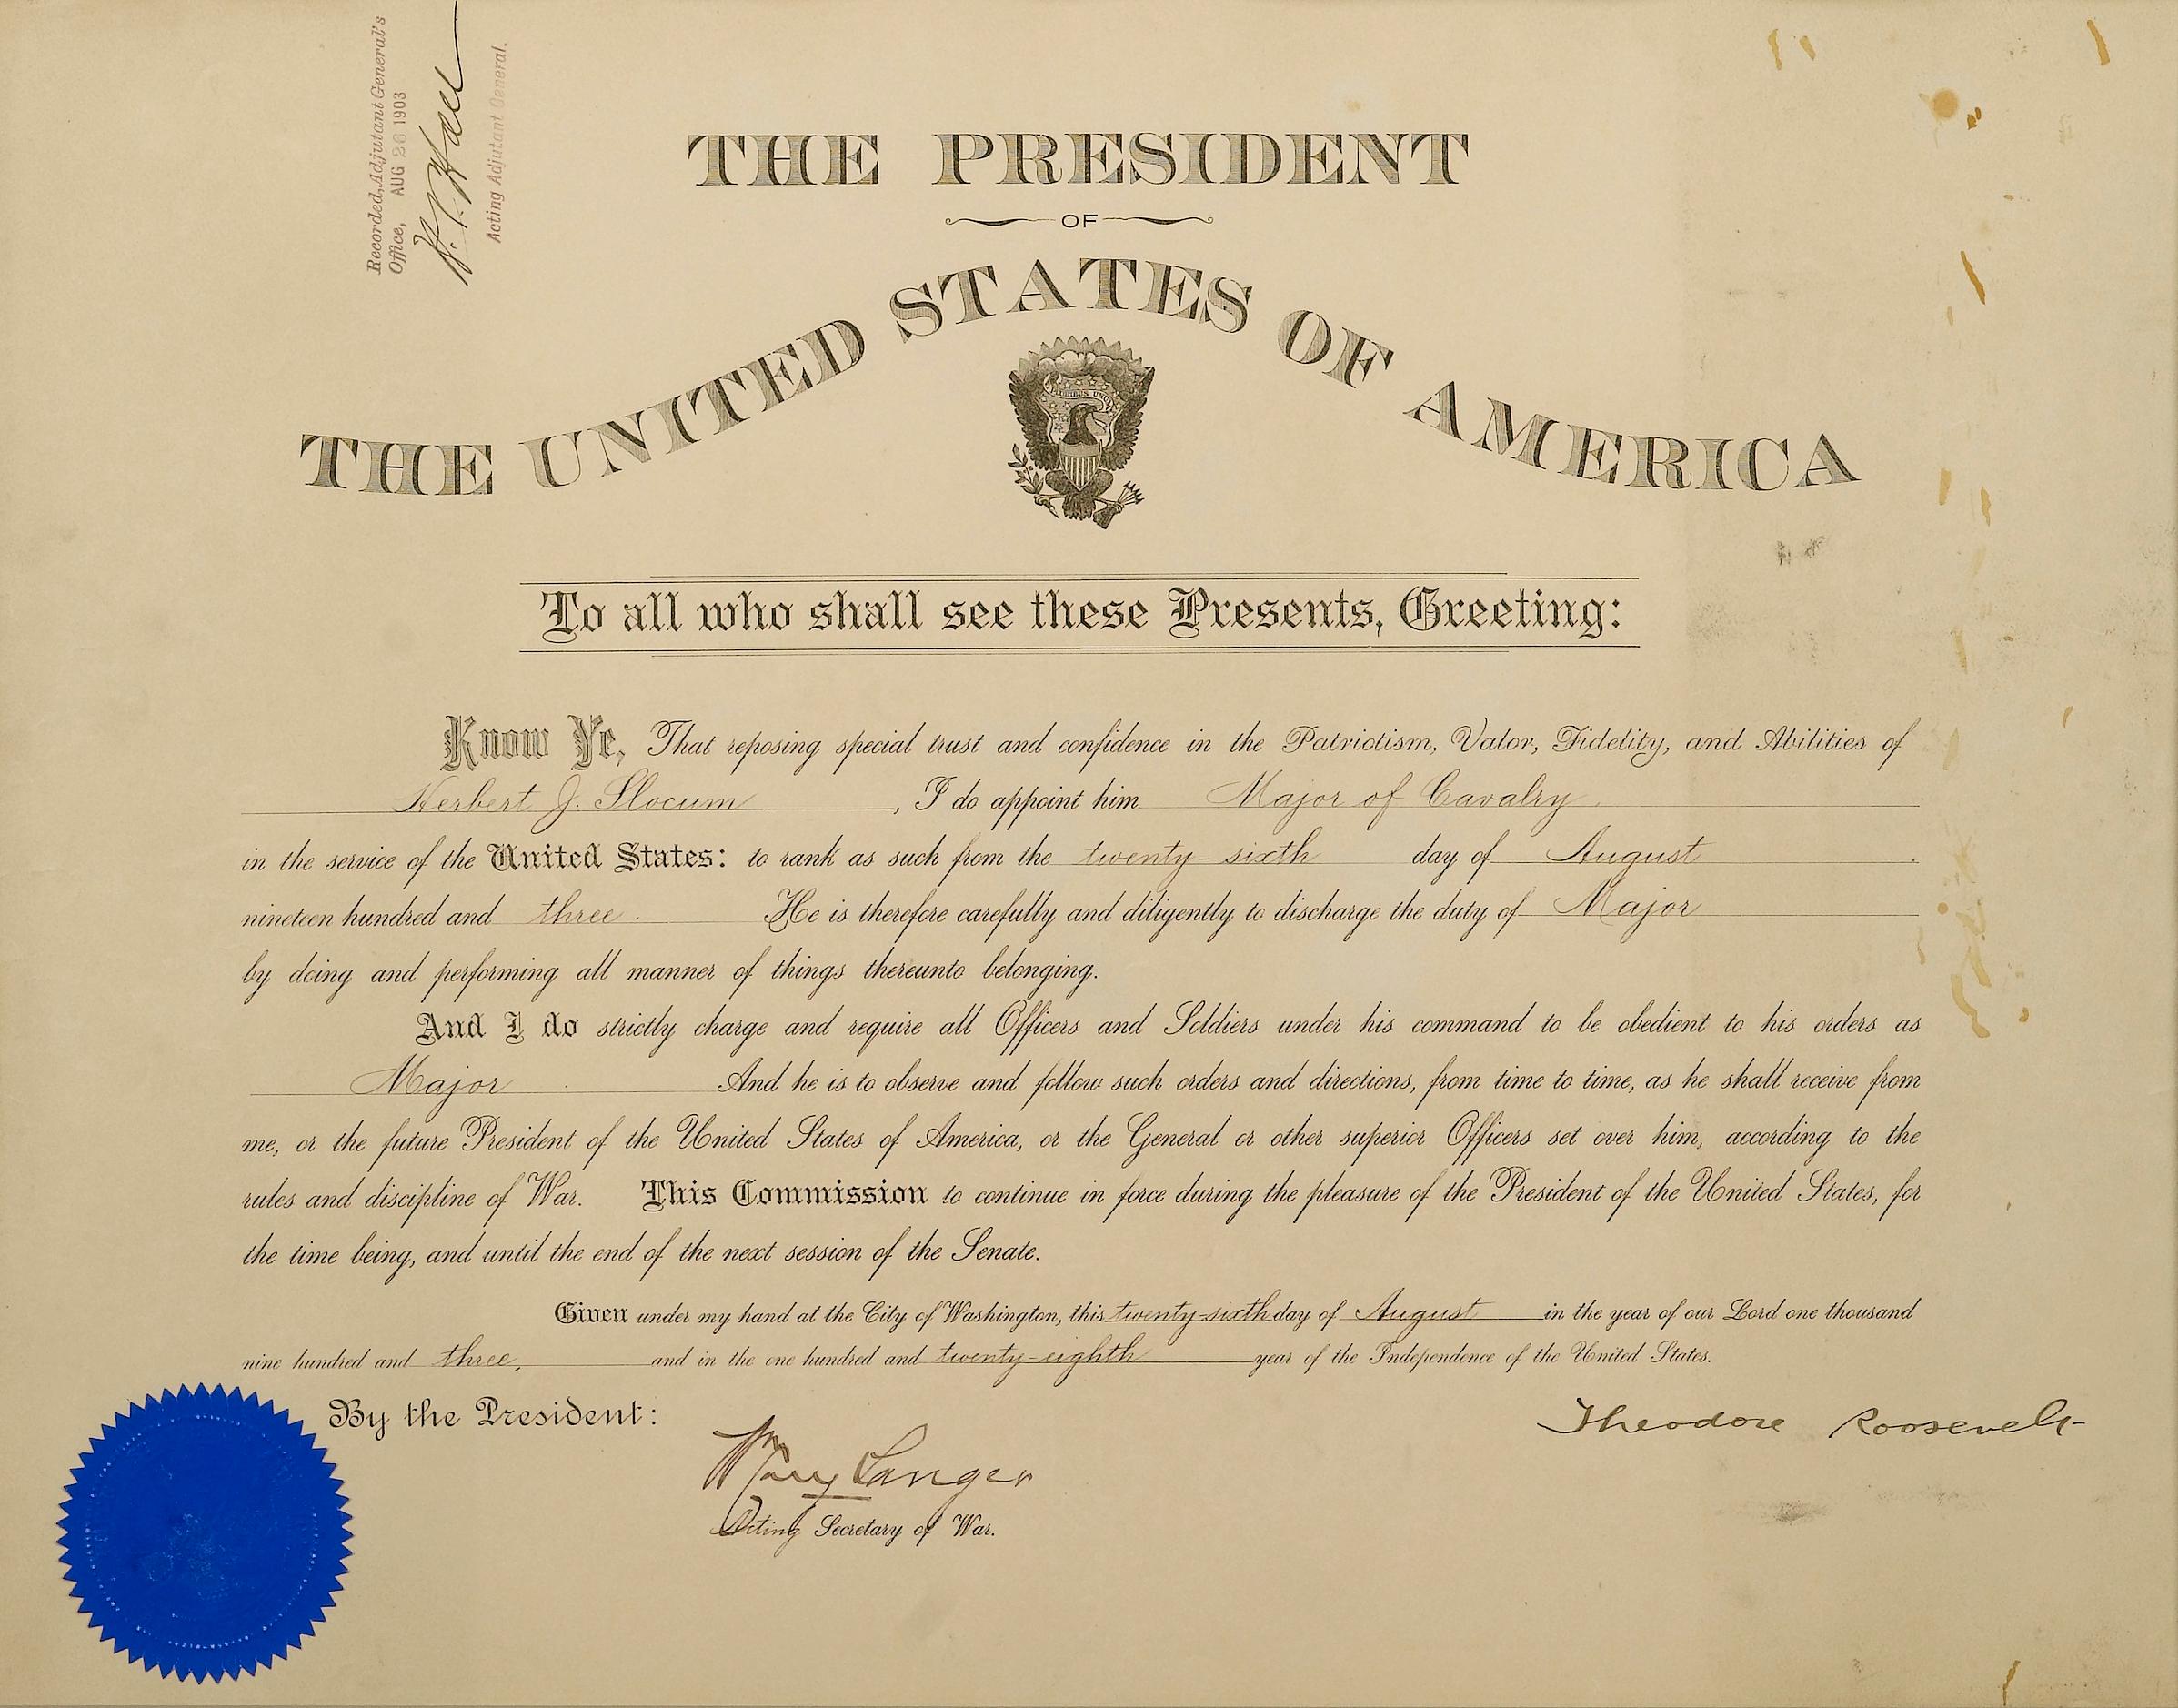 Presidential commission of an Army Calvary officer Herbert J. Slocum to the position of 